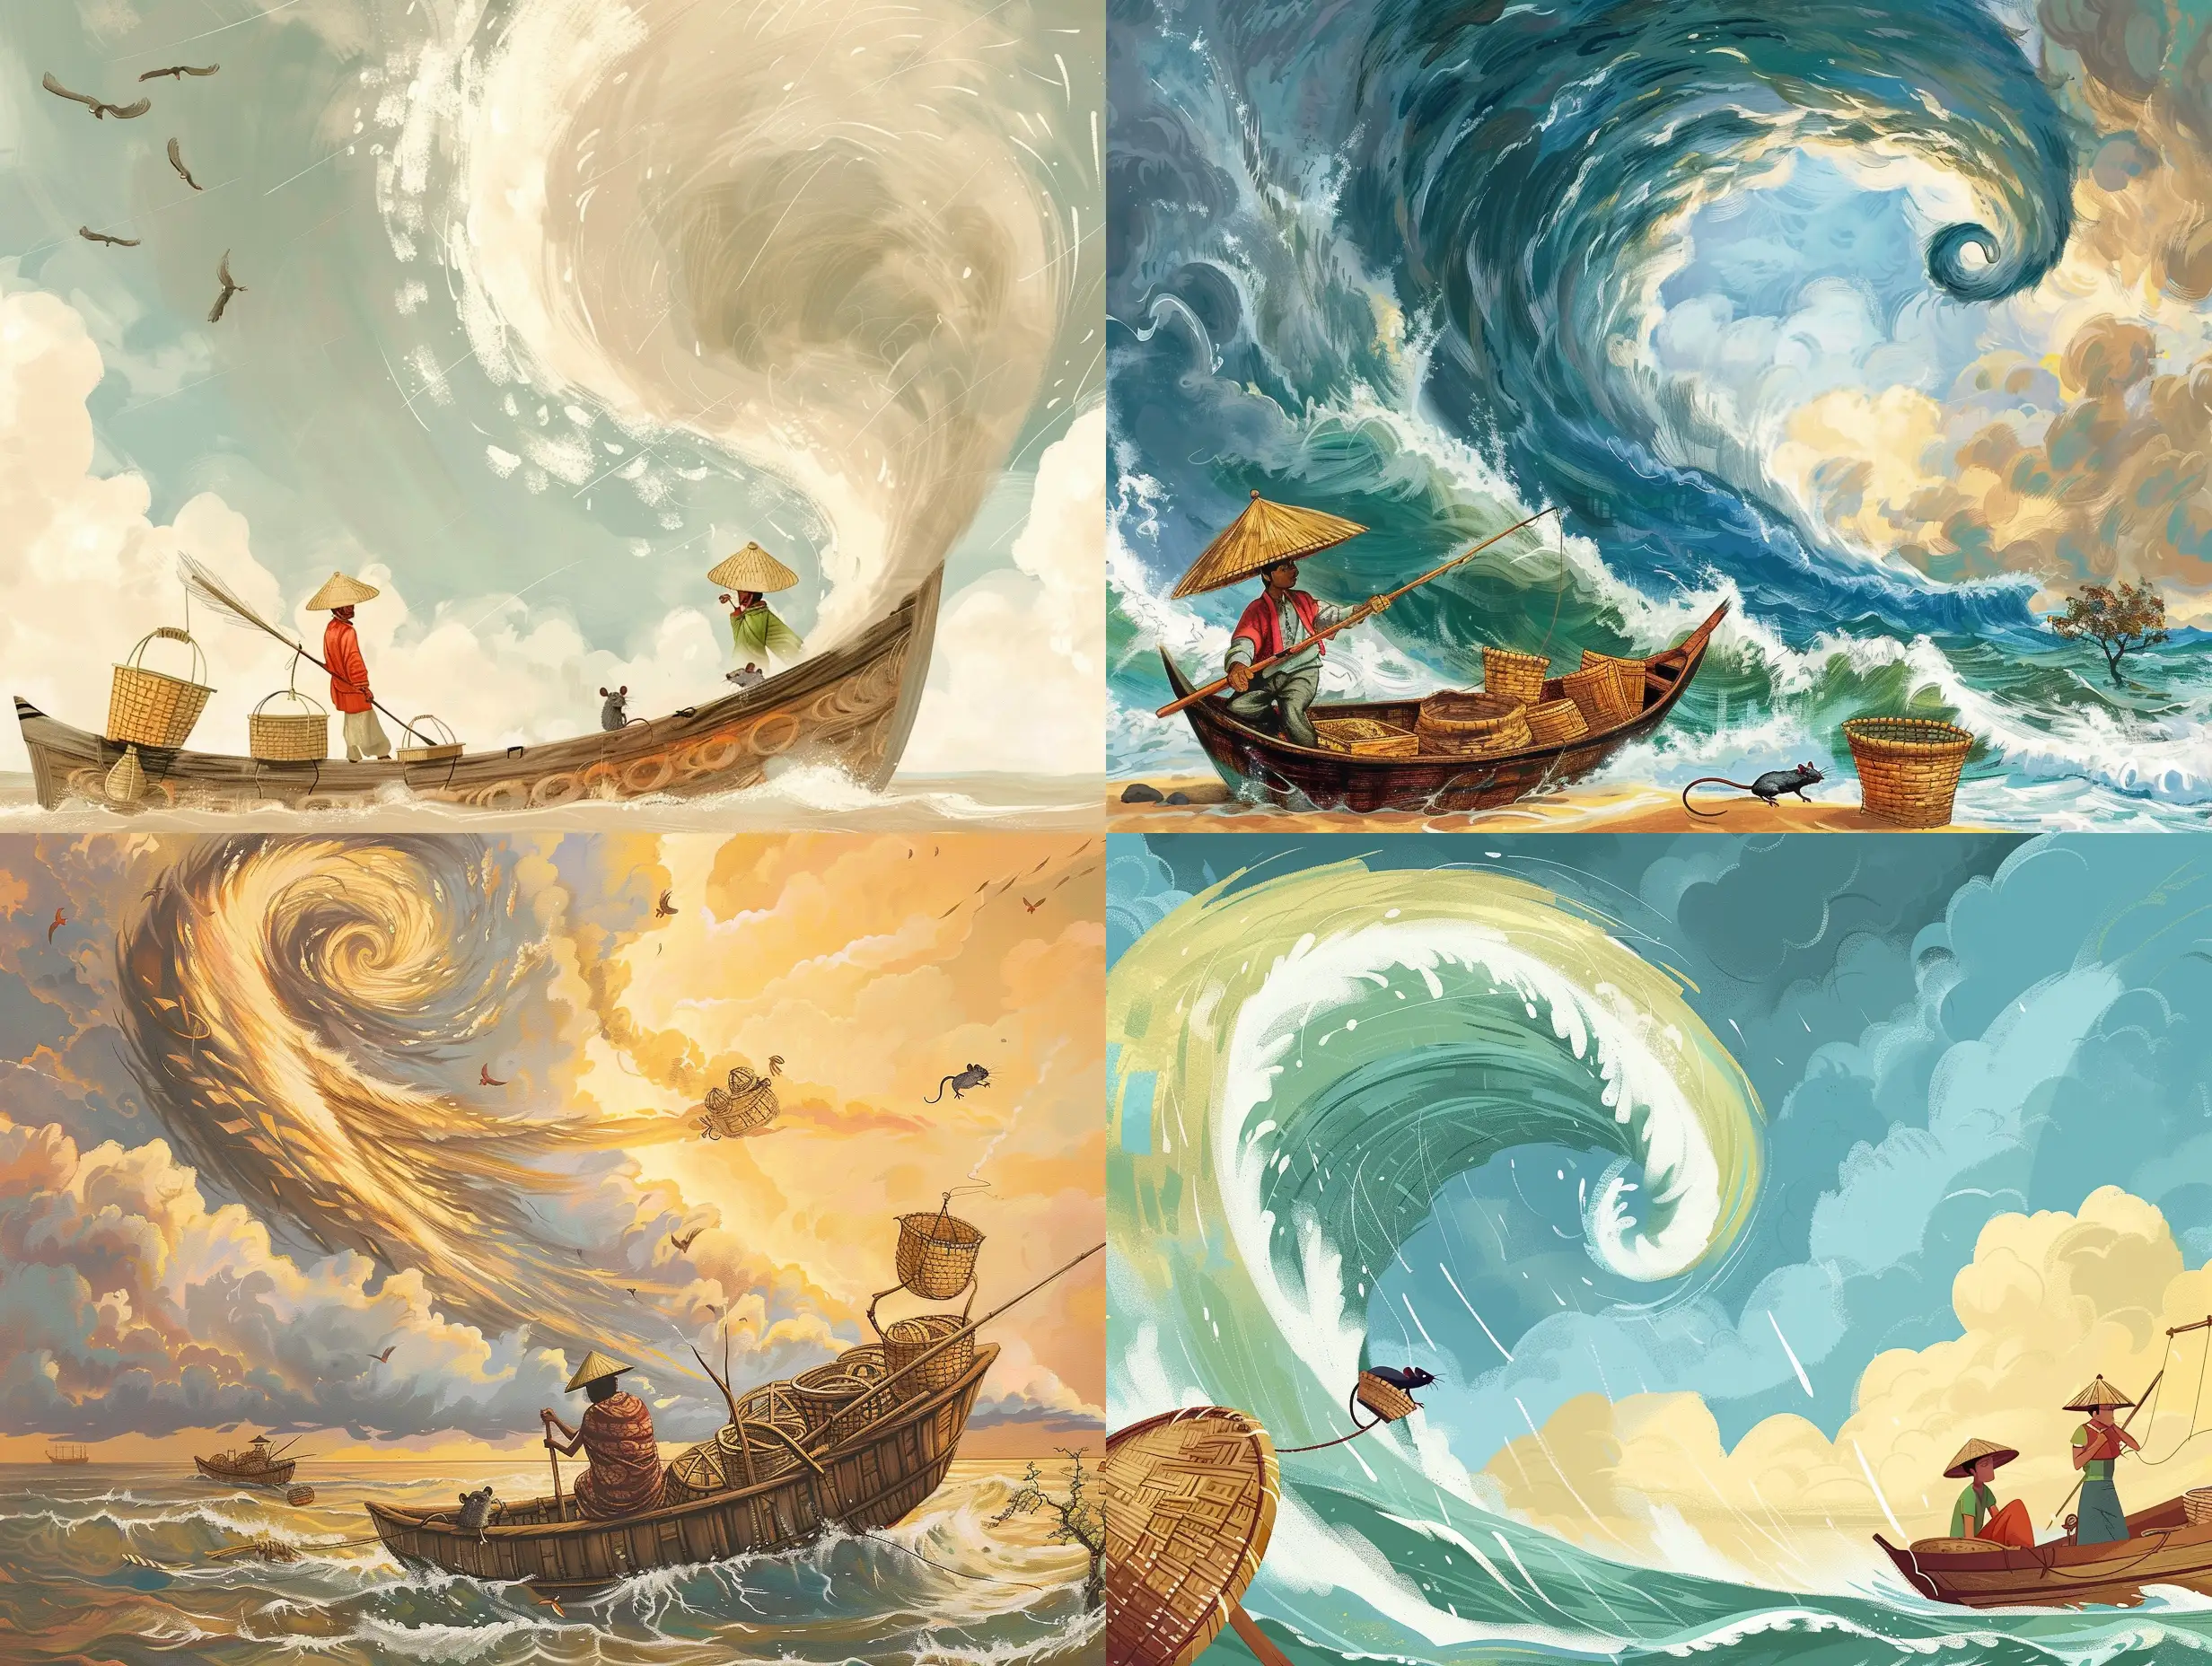 Illustration like a Disney fairytale about the huge whirlwind from the sea into the sky lifts a boat with Indonesian fisherman and a rat hidden in baskets, Indonesian atmosphere 